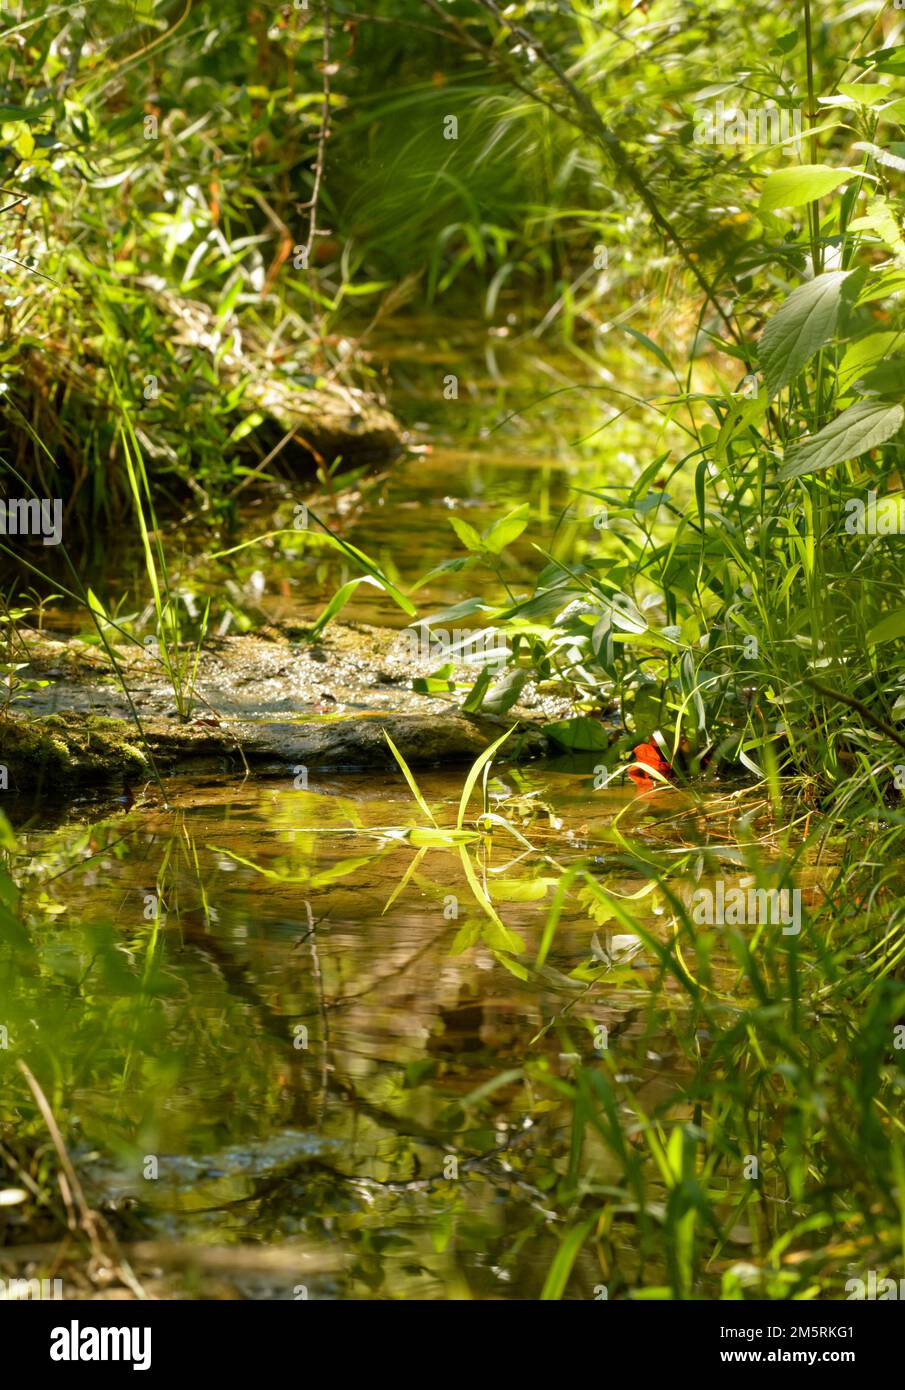 Shallow stream in the woods, with plants and grasses growing on the banks, softly lit by scattered sunlight through trees Stock Photo